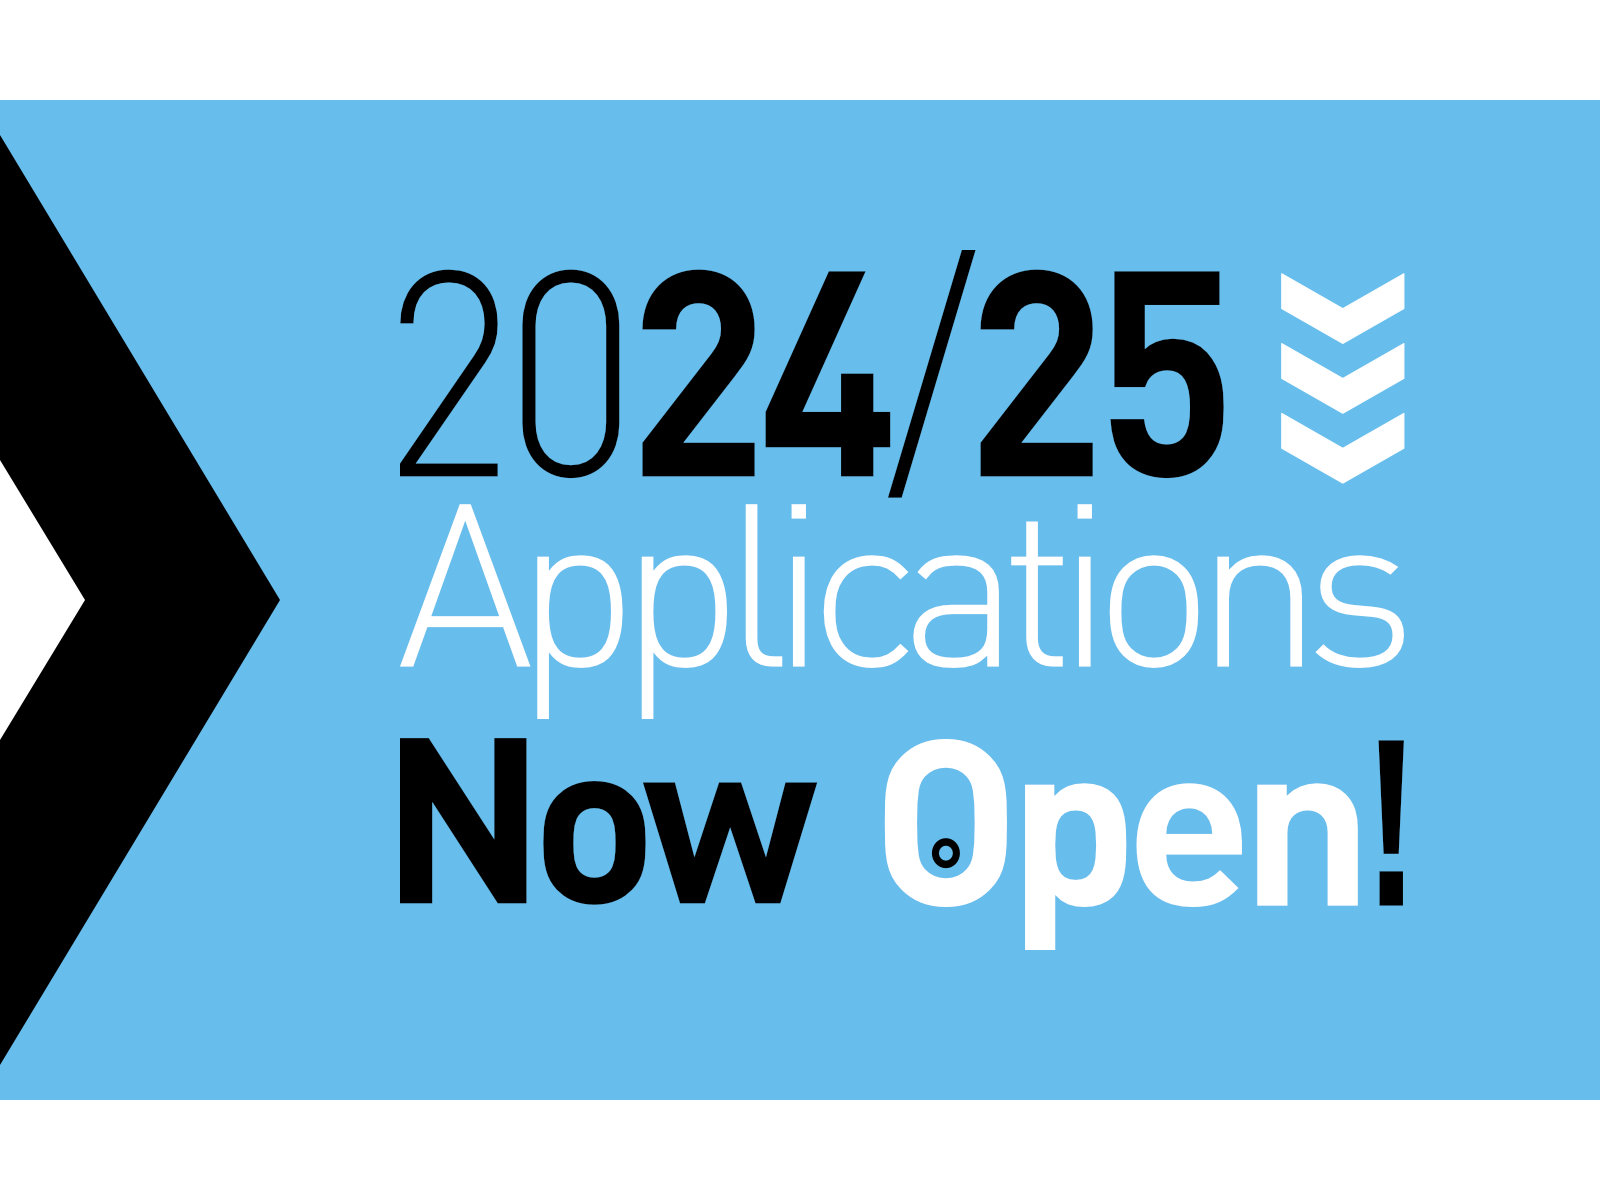 Applications for 2024/25 are now open!